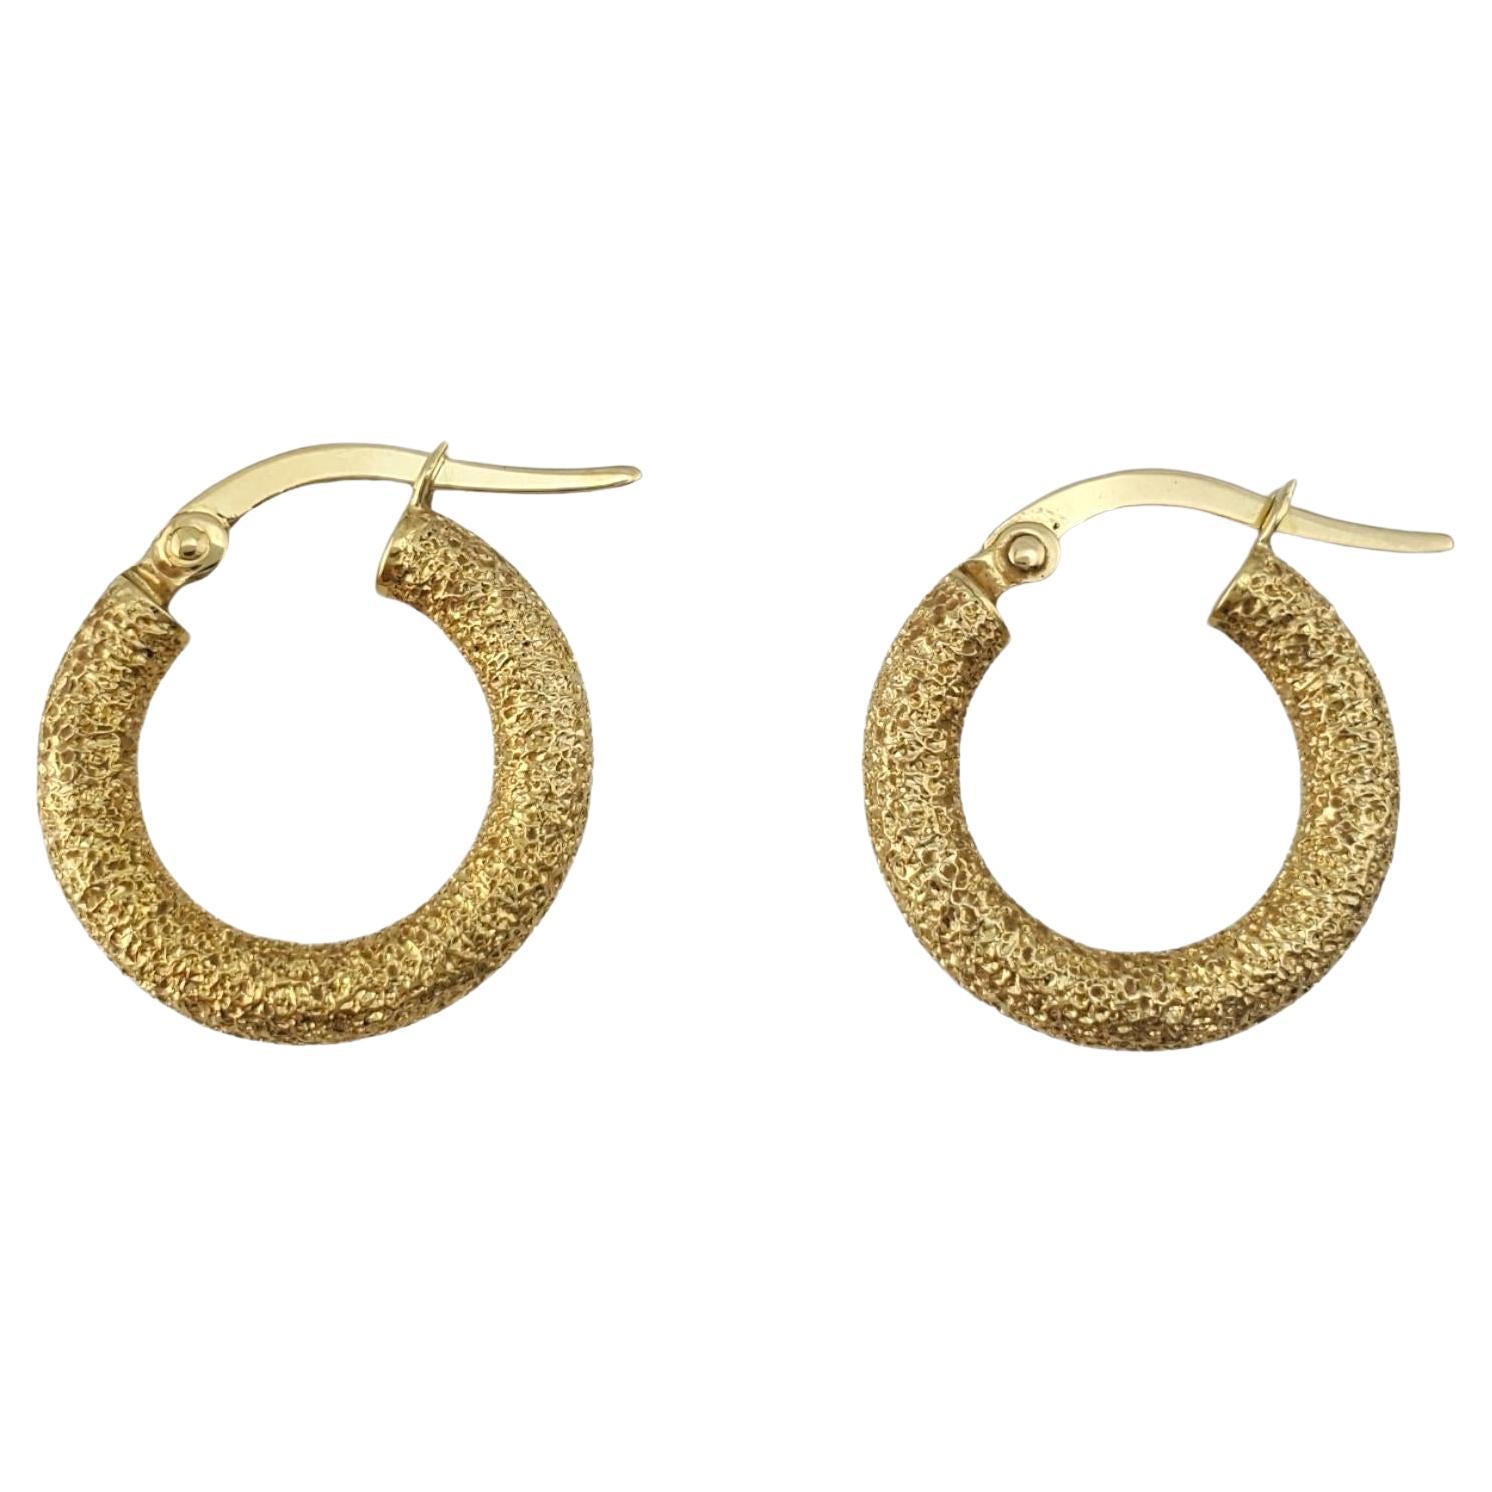 18K Yellow Gold Textured Stone Finish Hoop Earrings #17794